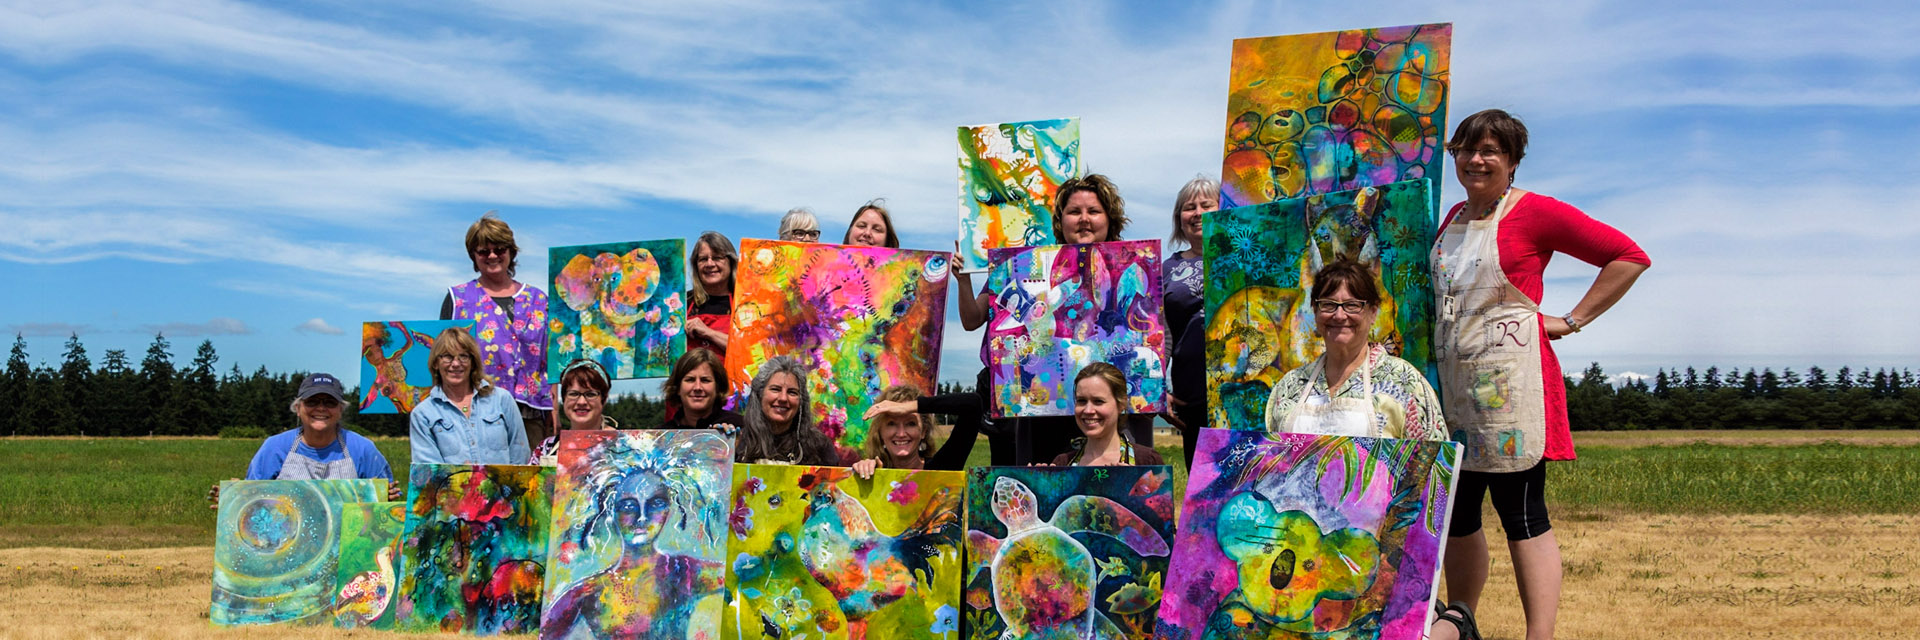 Whidbey Island Painting class 2